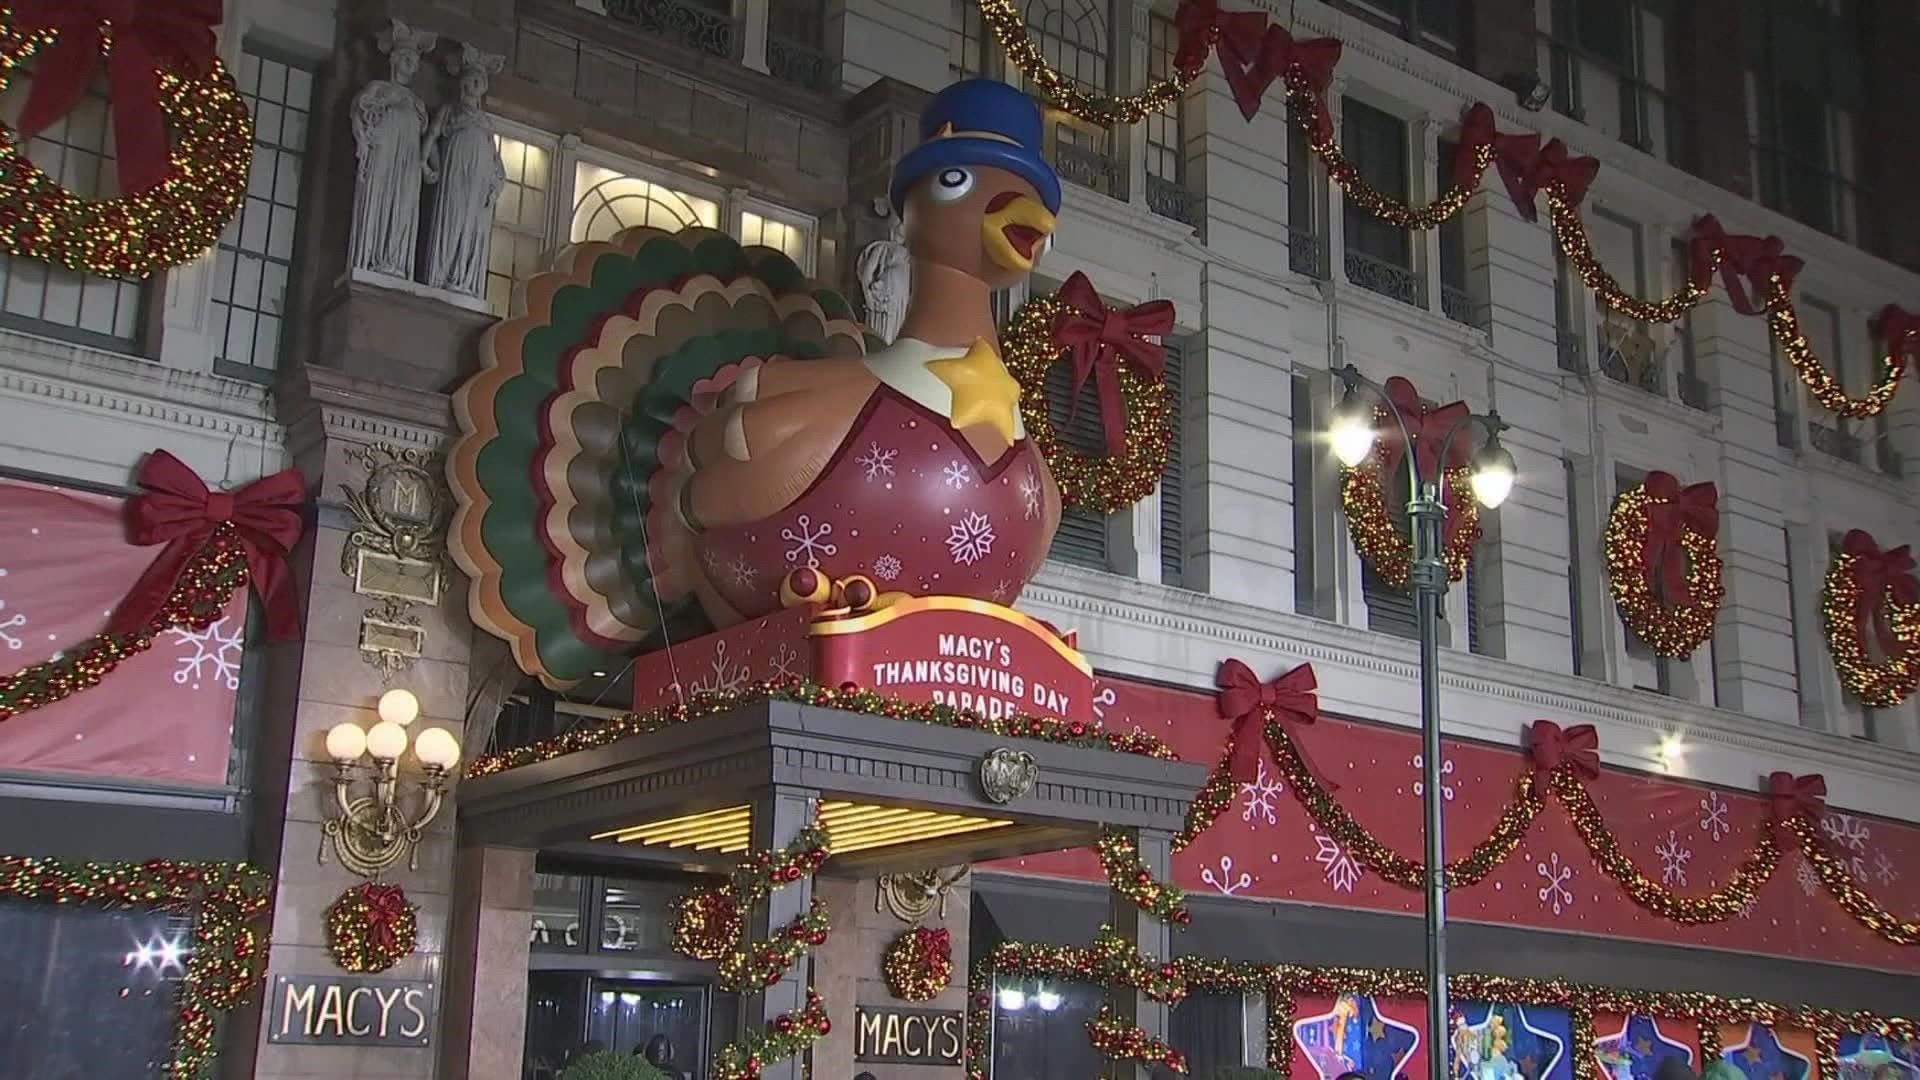 The countdown is on to the 2022 Macy's Thanksgiving Day parade in New York City.